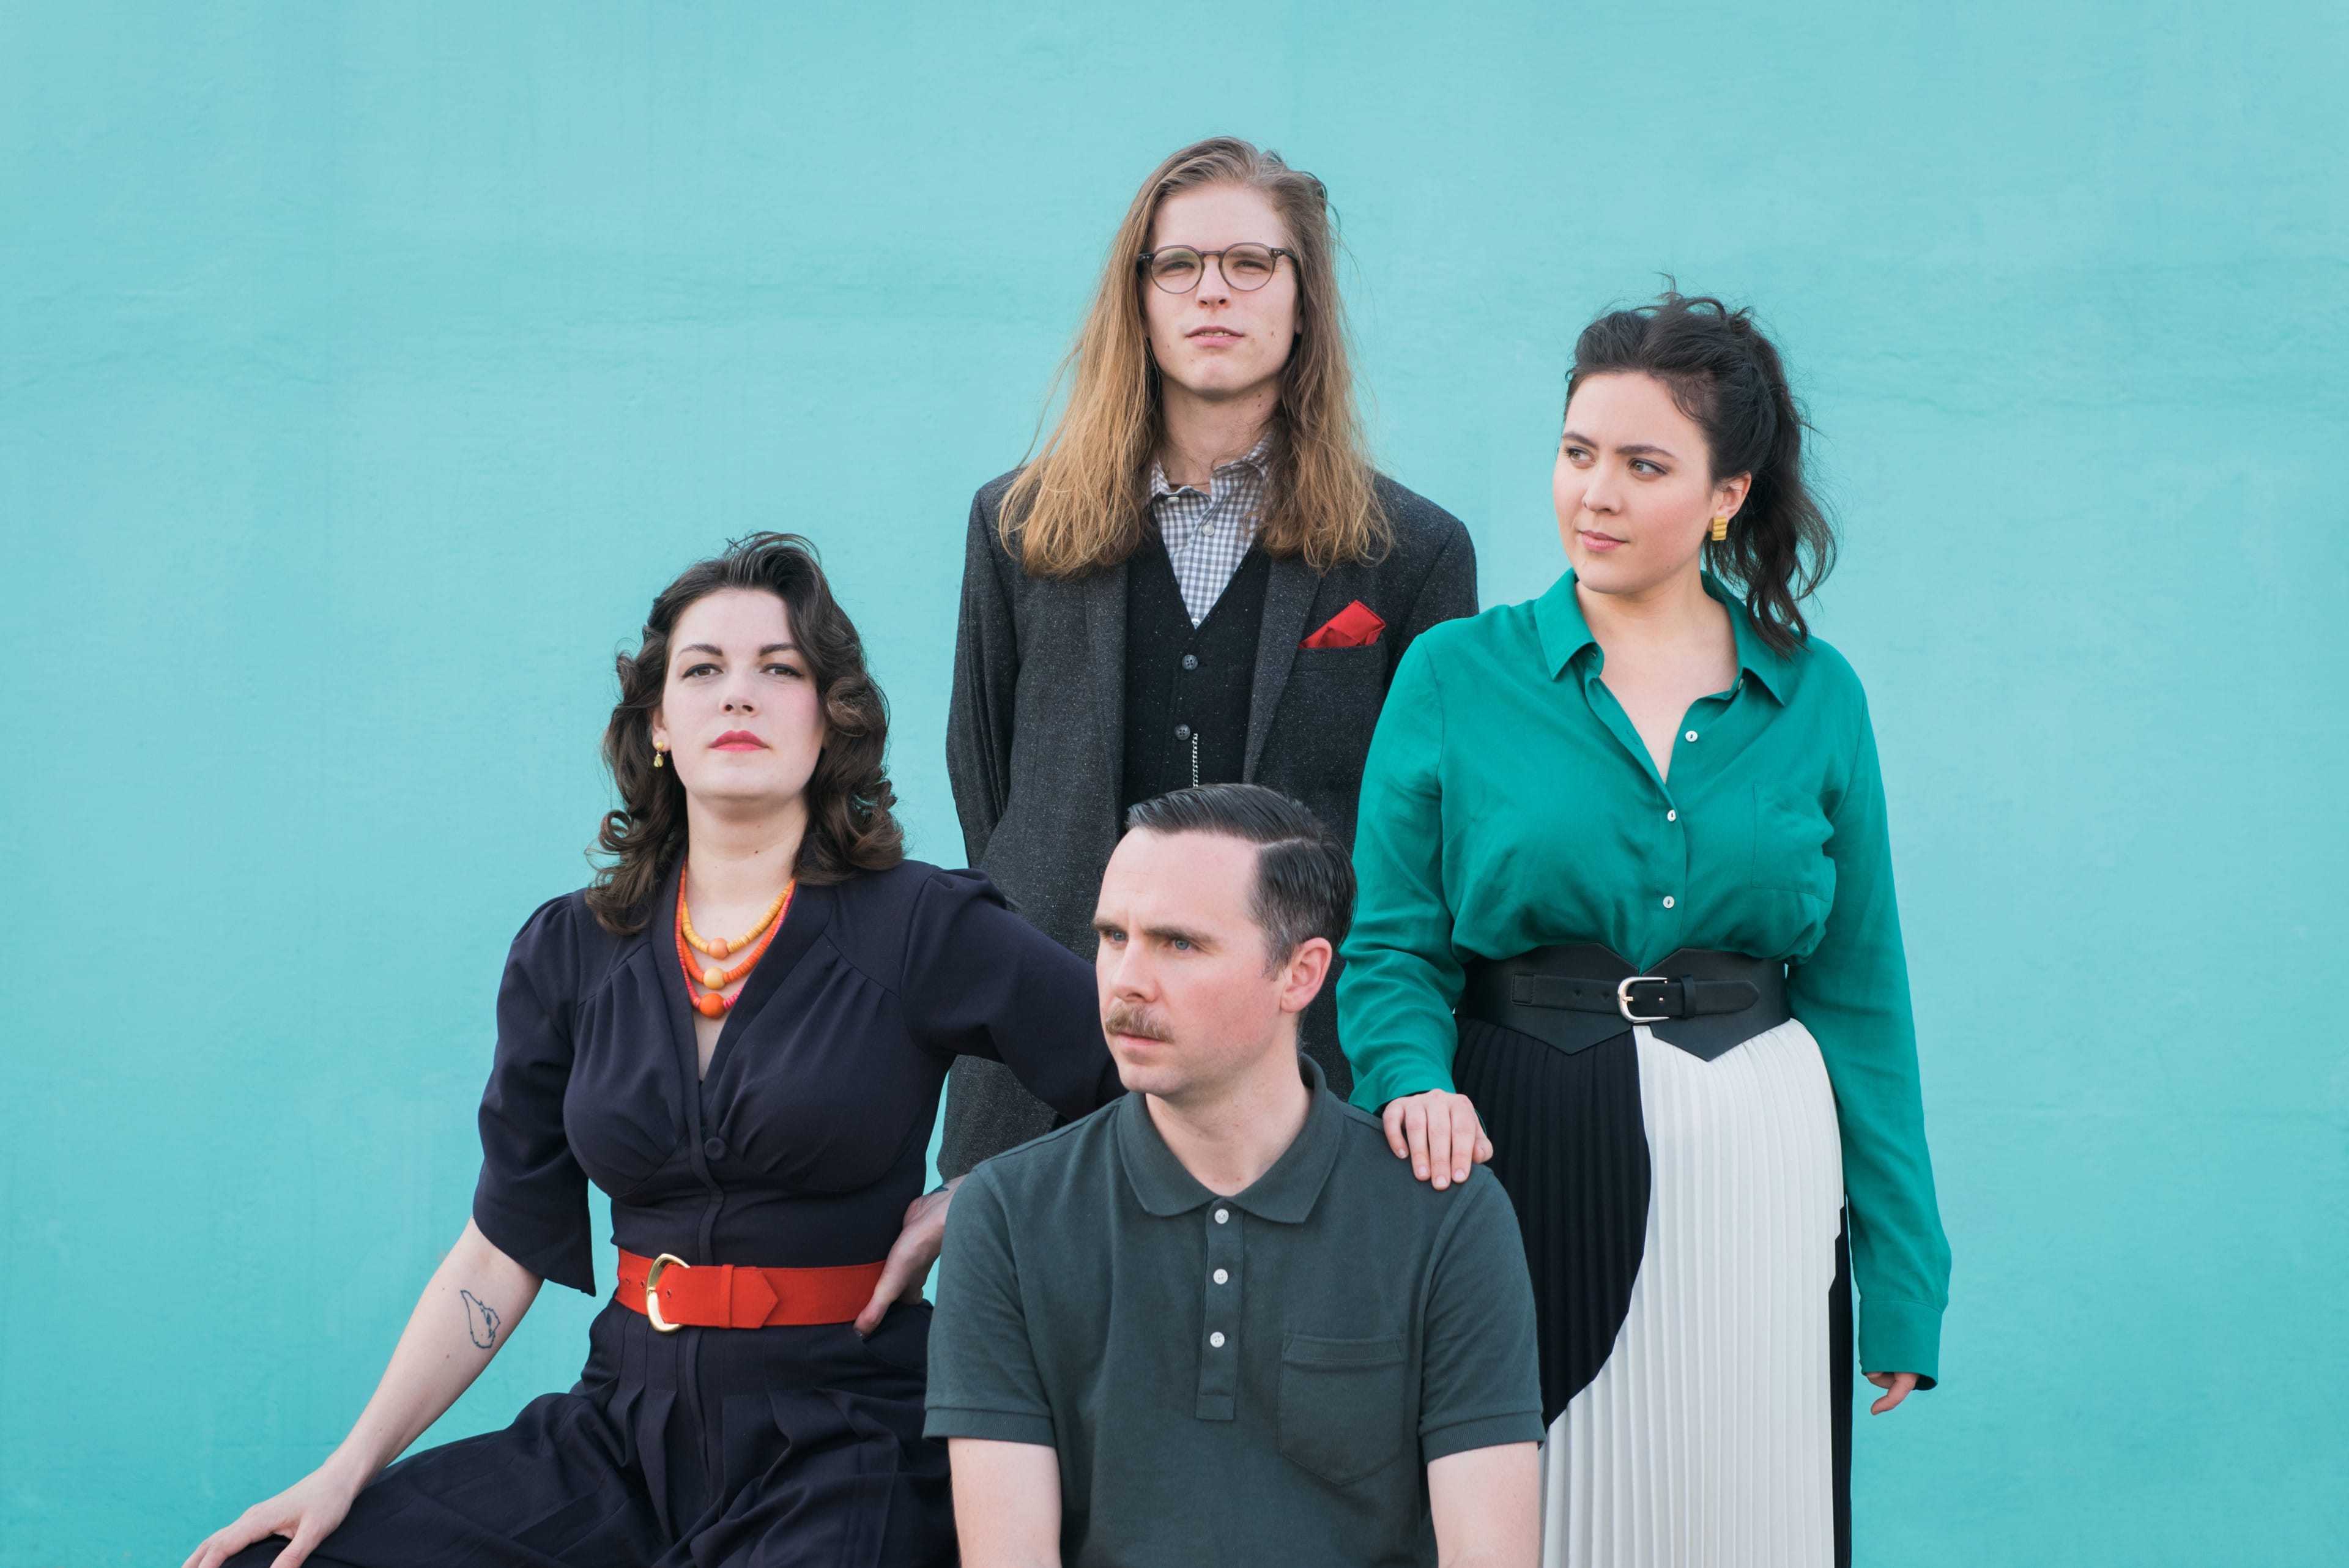 Bill And The Belles Announce DreamSongs, Etc., Drop “Wedding Bell Chimes” Video